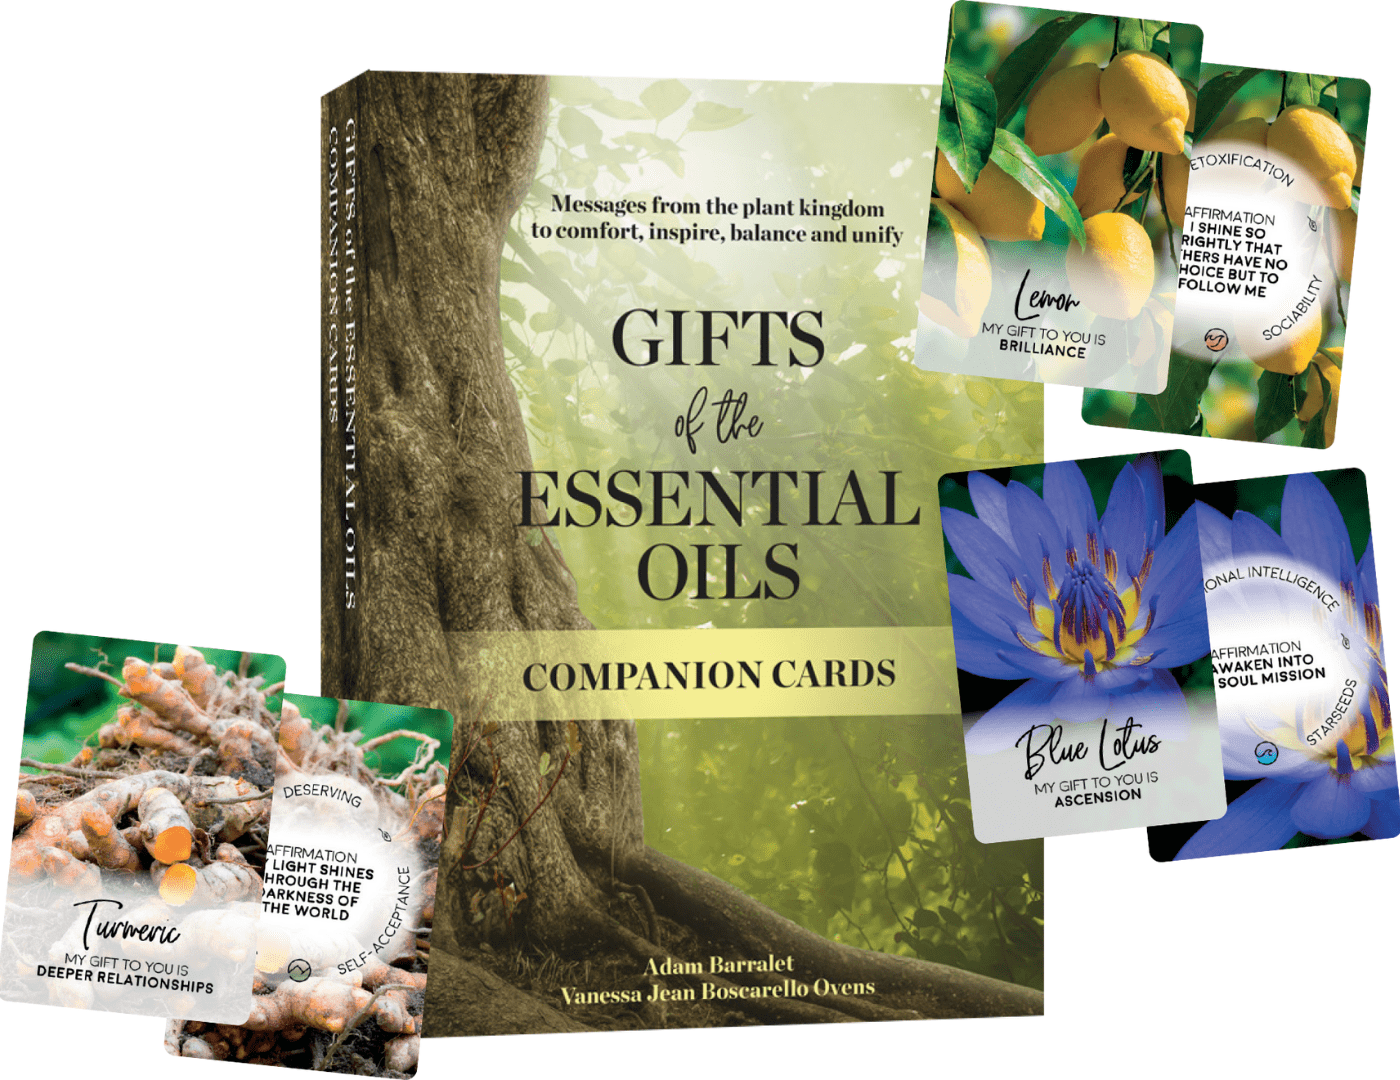 Gifts of the Essential Oils - Companion Cards - Oil Life Canada - Canada's Best Essential Oil Supplies